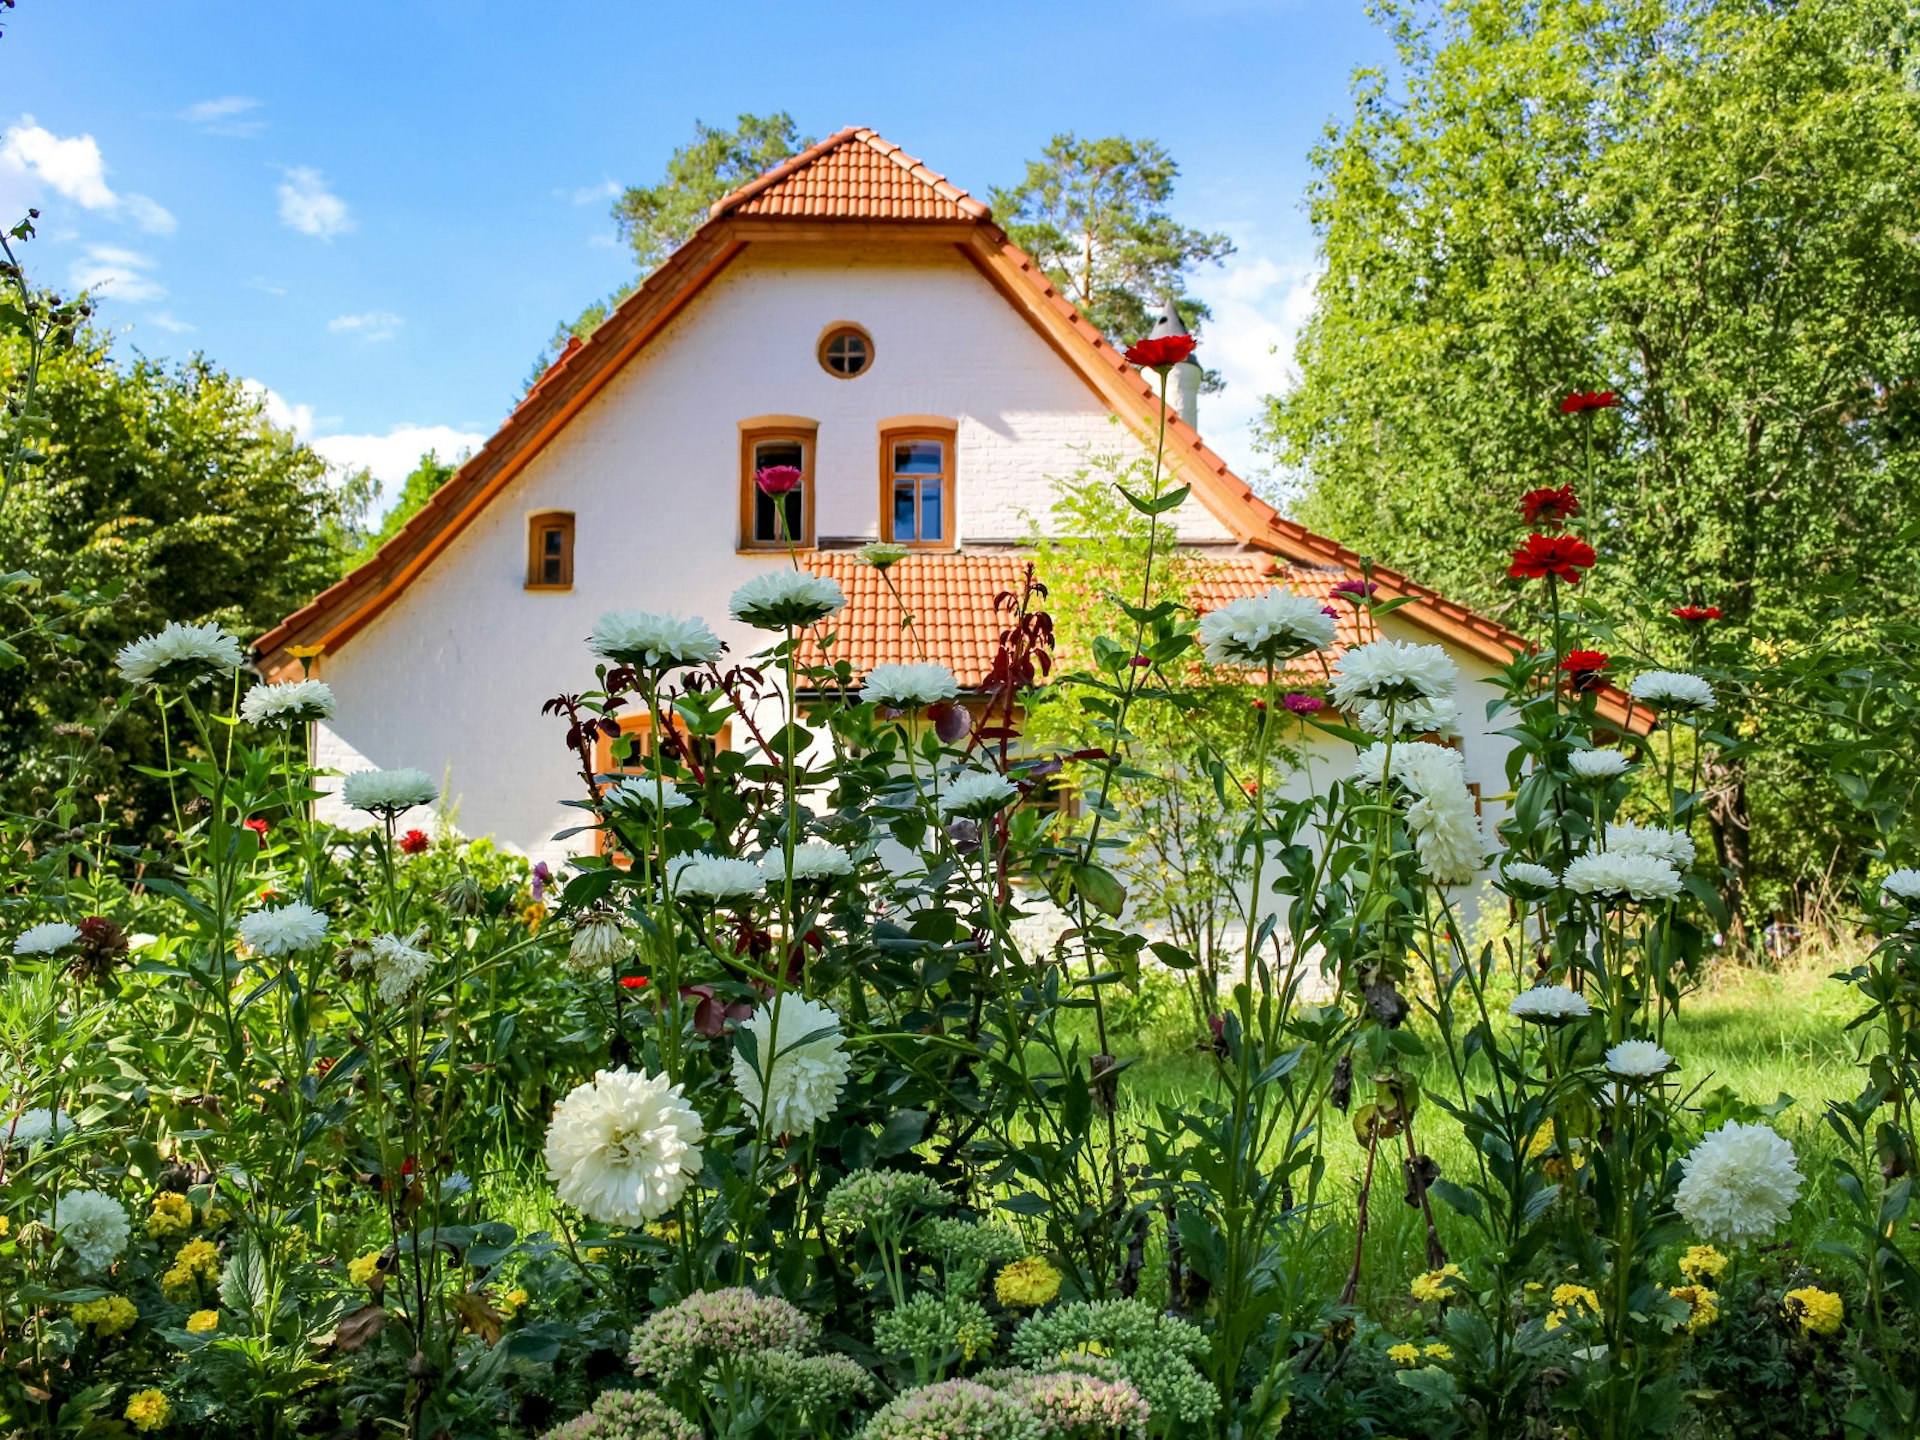 The Abbey, a charming cottage that's home to an artists’ studio in Polenovo © Yiriy Mezenmir / Shutterstock